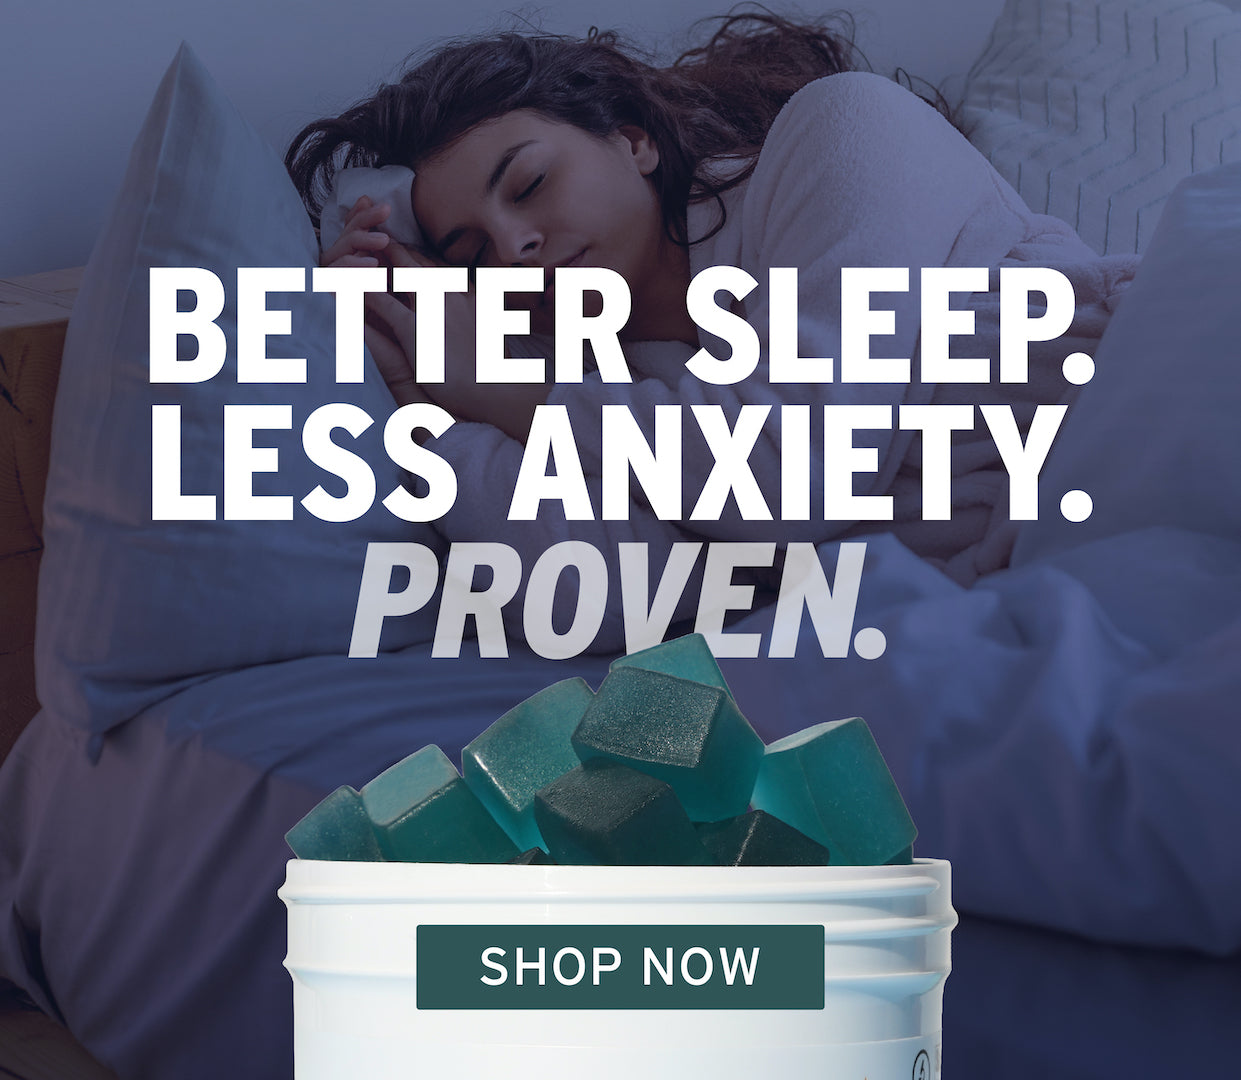 better sleep. less anxiety. proven. shop now.